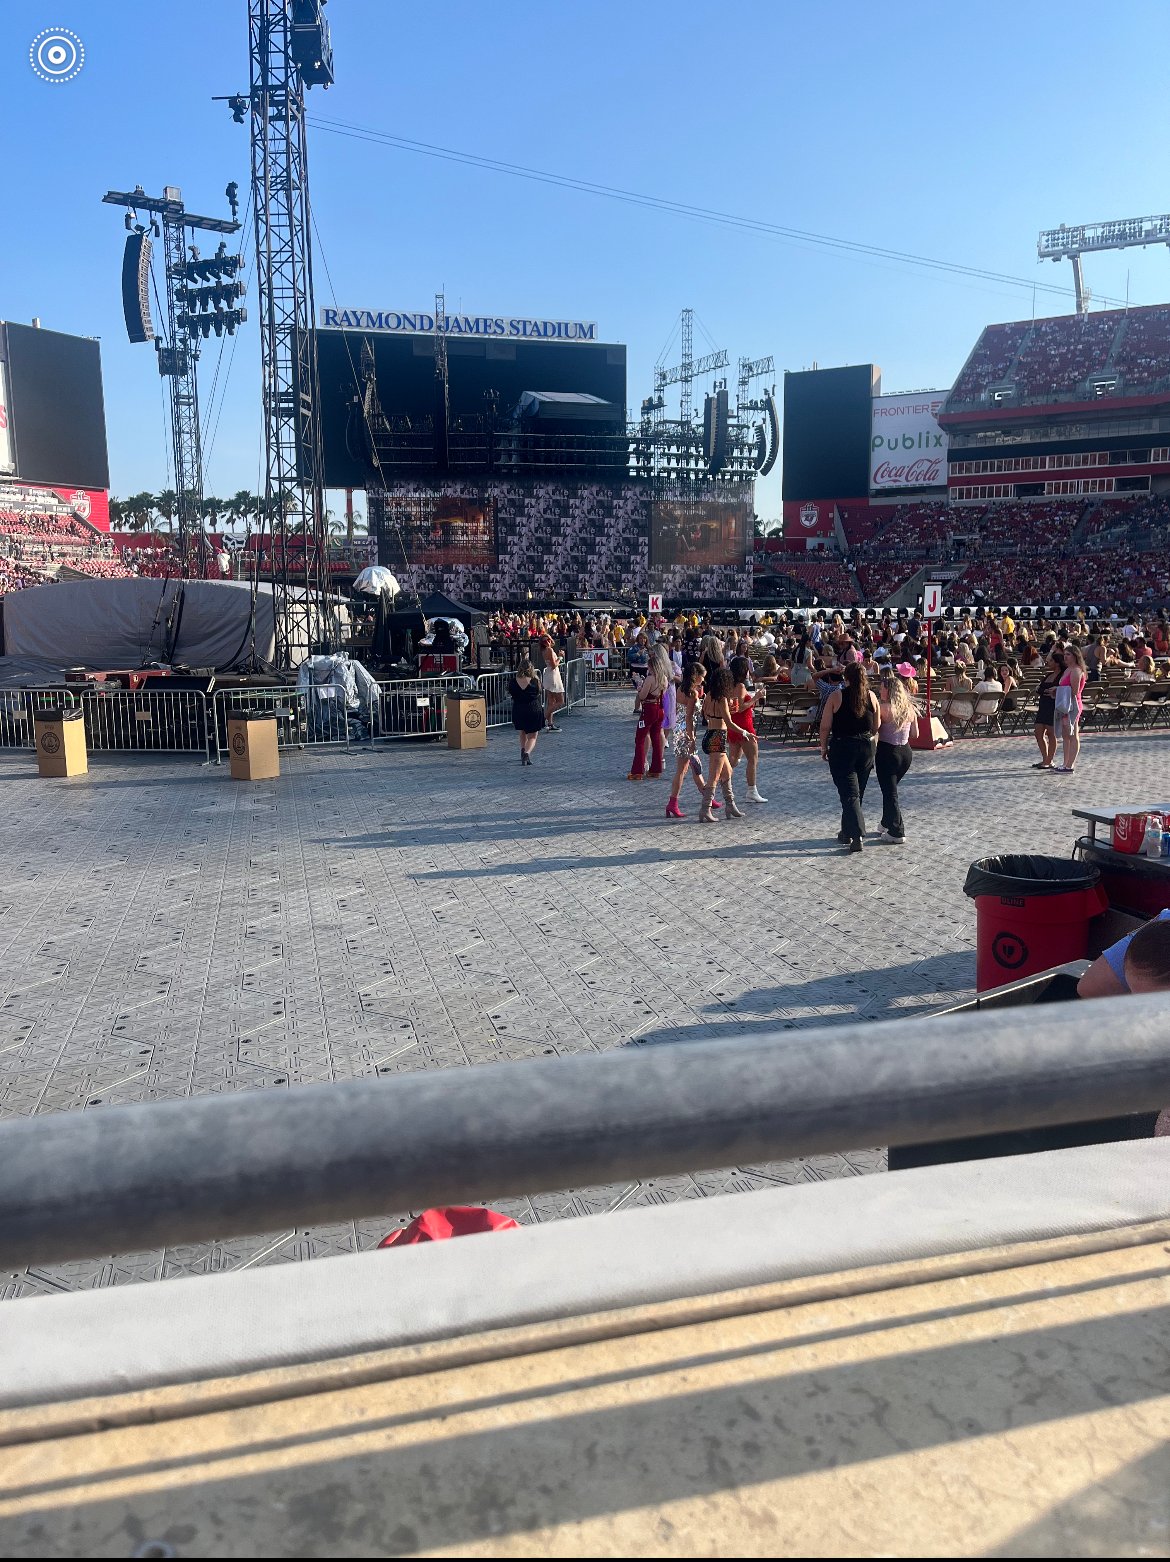 section 146, row a seat view  for concert - raymond james stadium